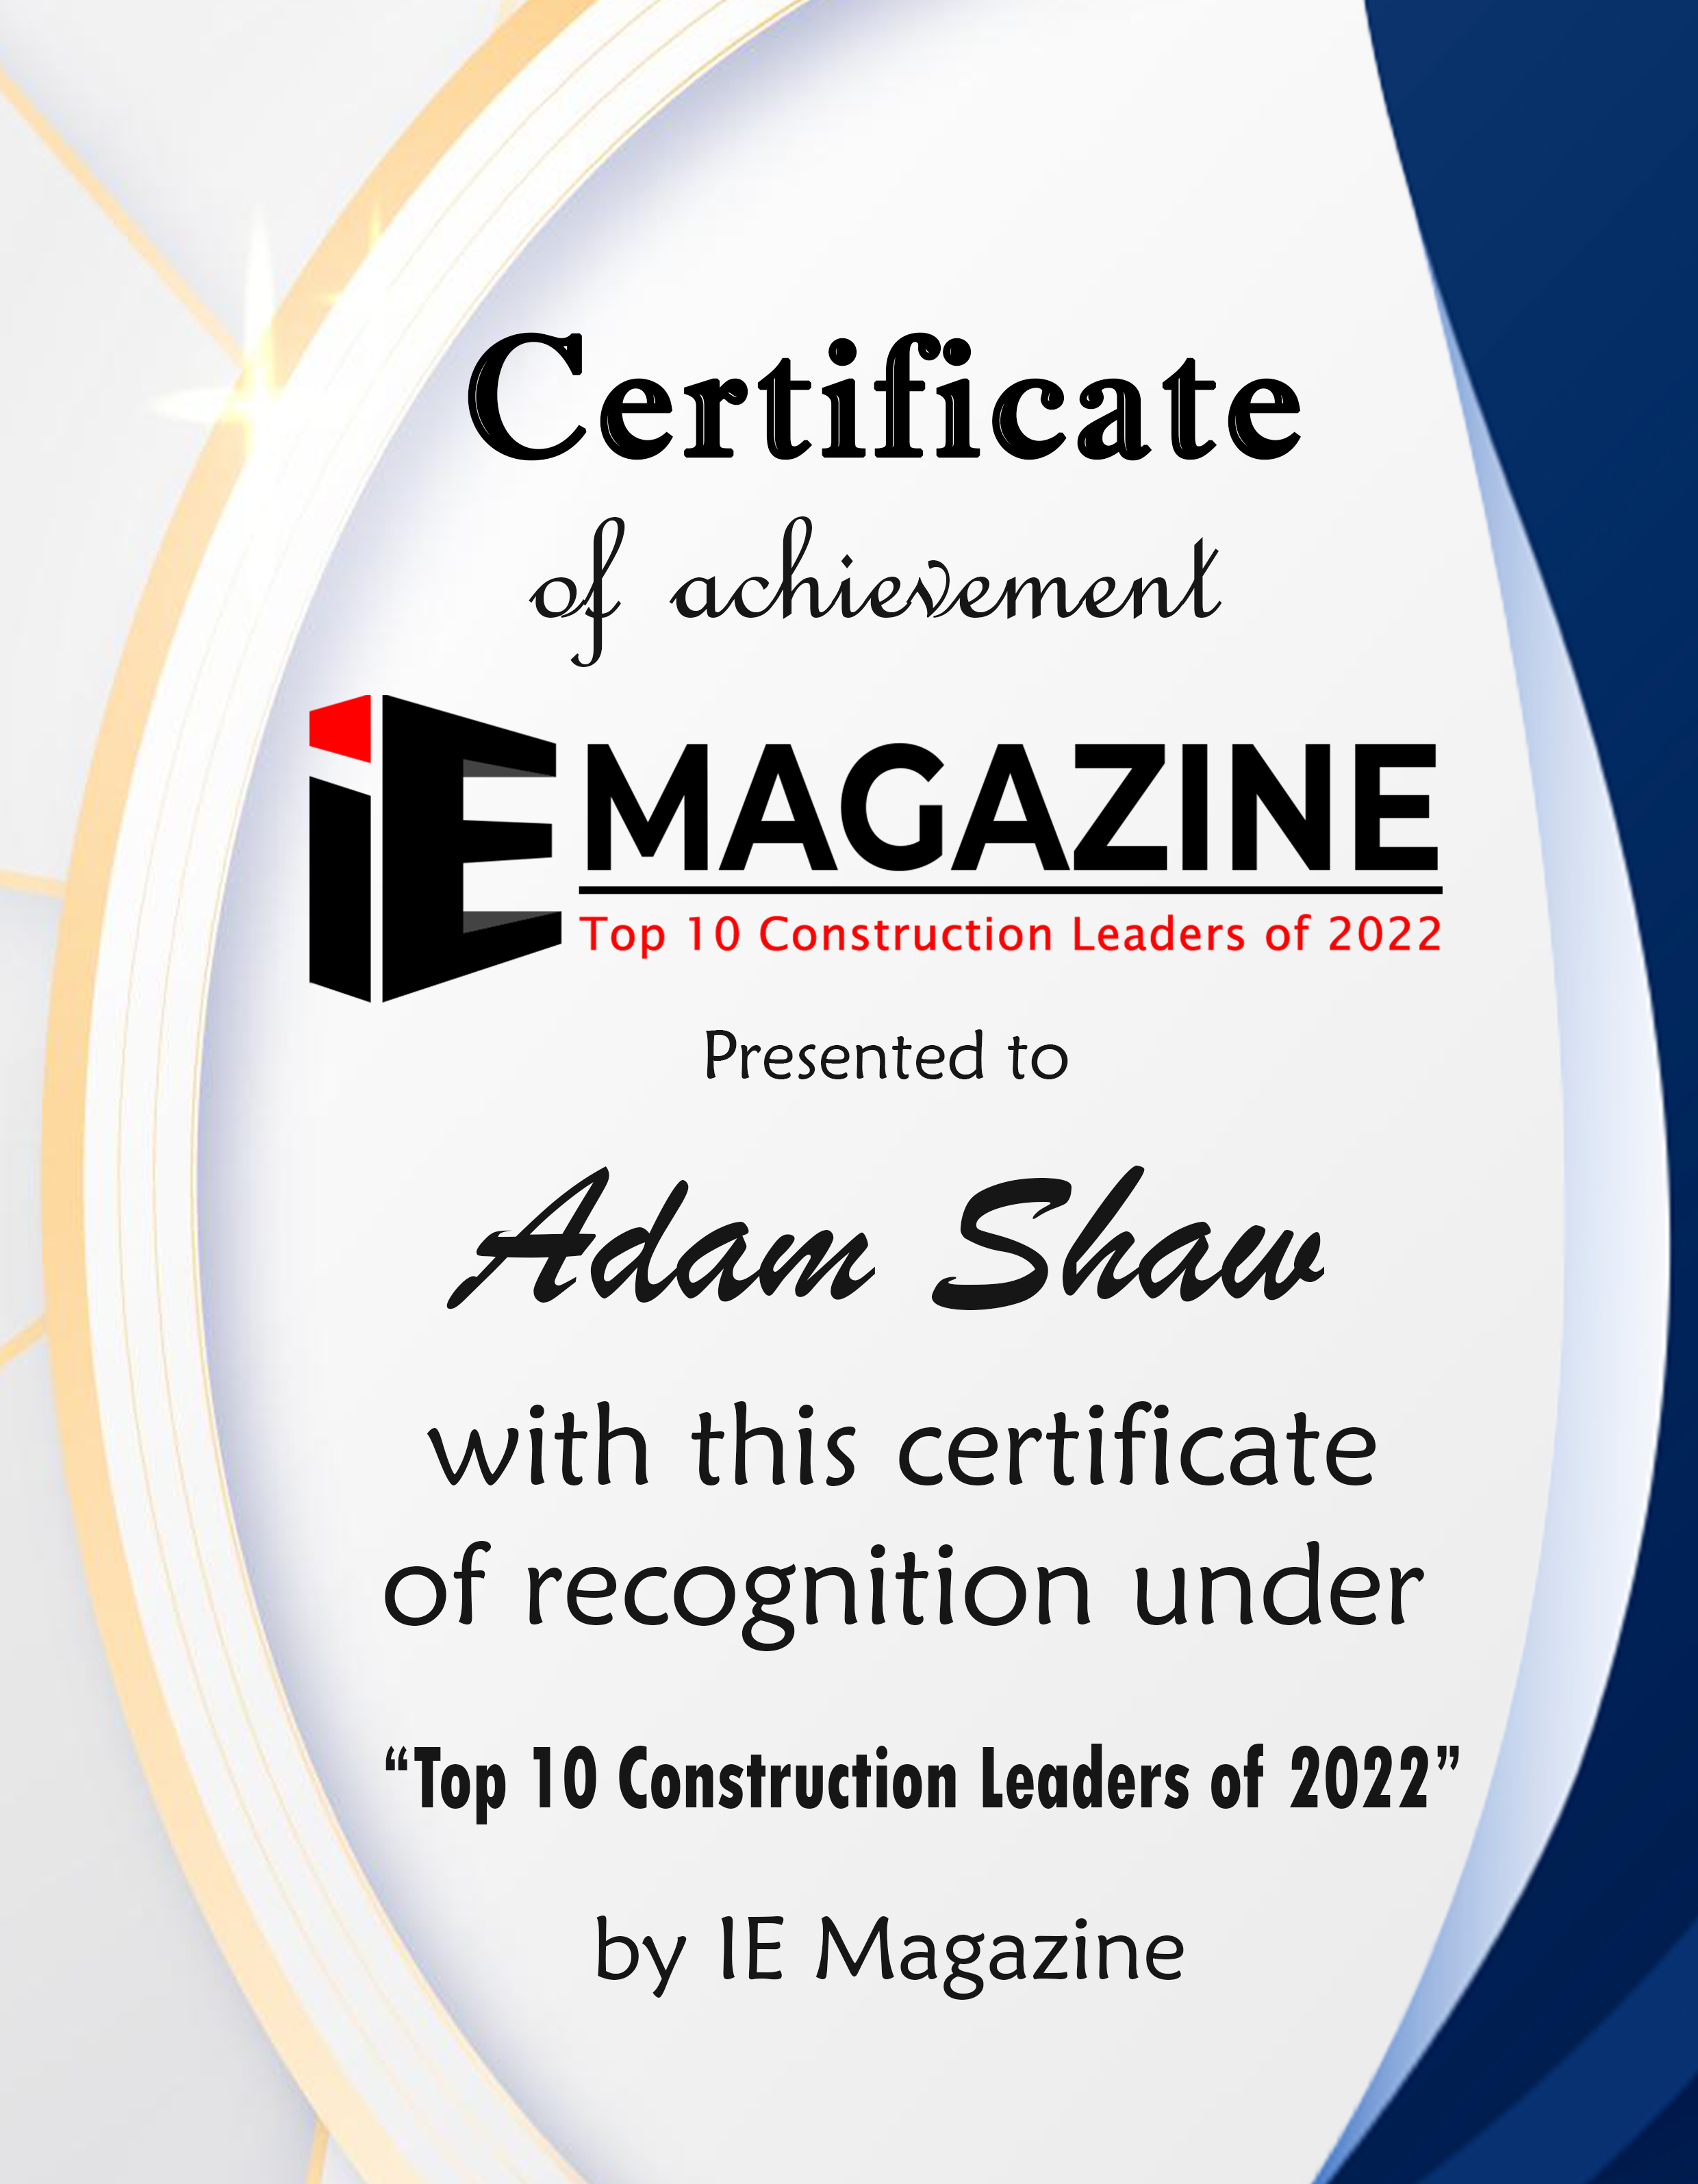 Adam Shaw, Chief Executive Officer of Builders Protection Group, LLC Certificate